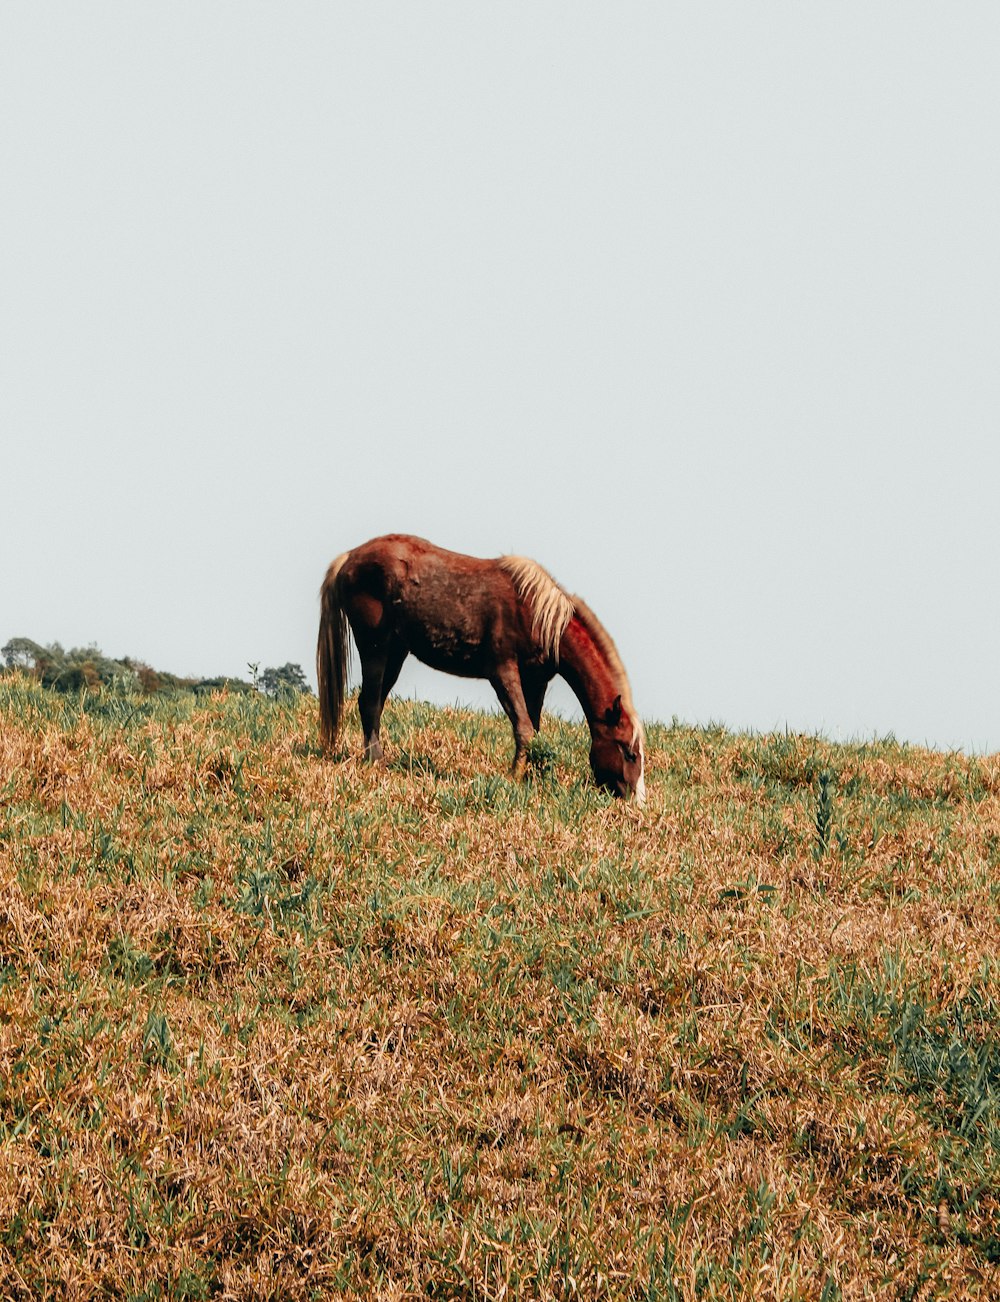 horse eating grass in field